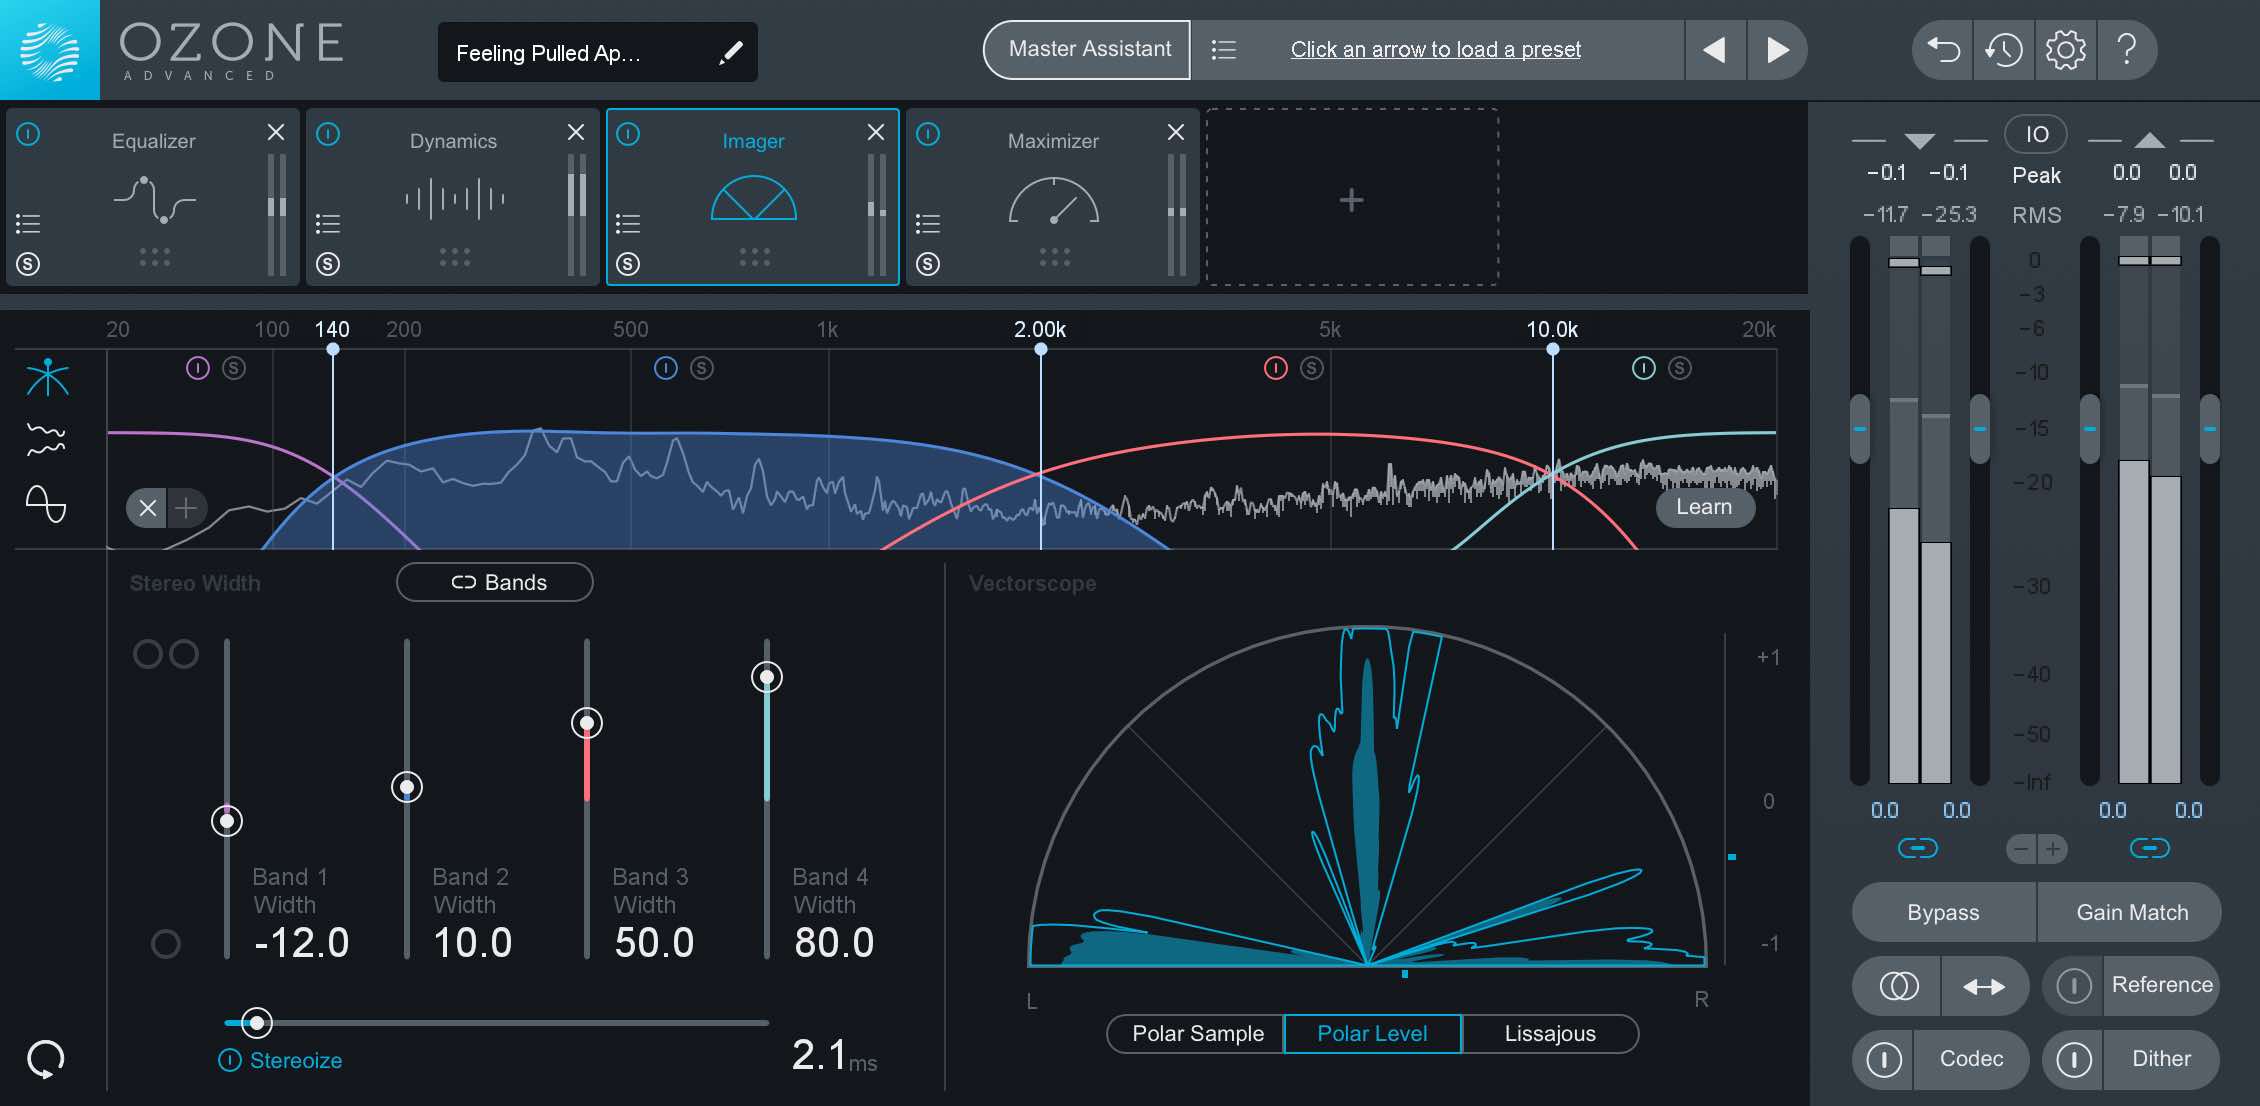 how much is izotope ozone 8 advanced